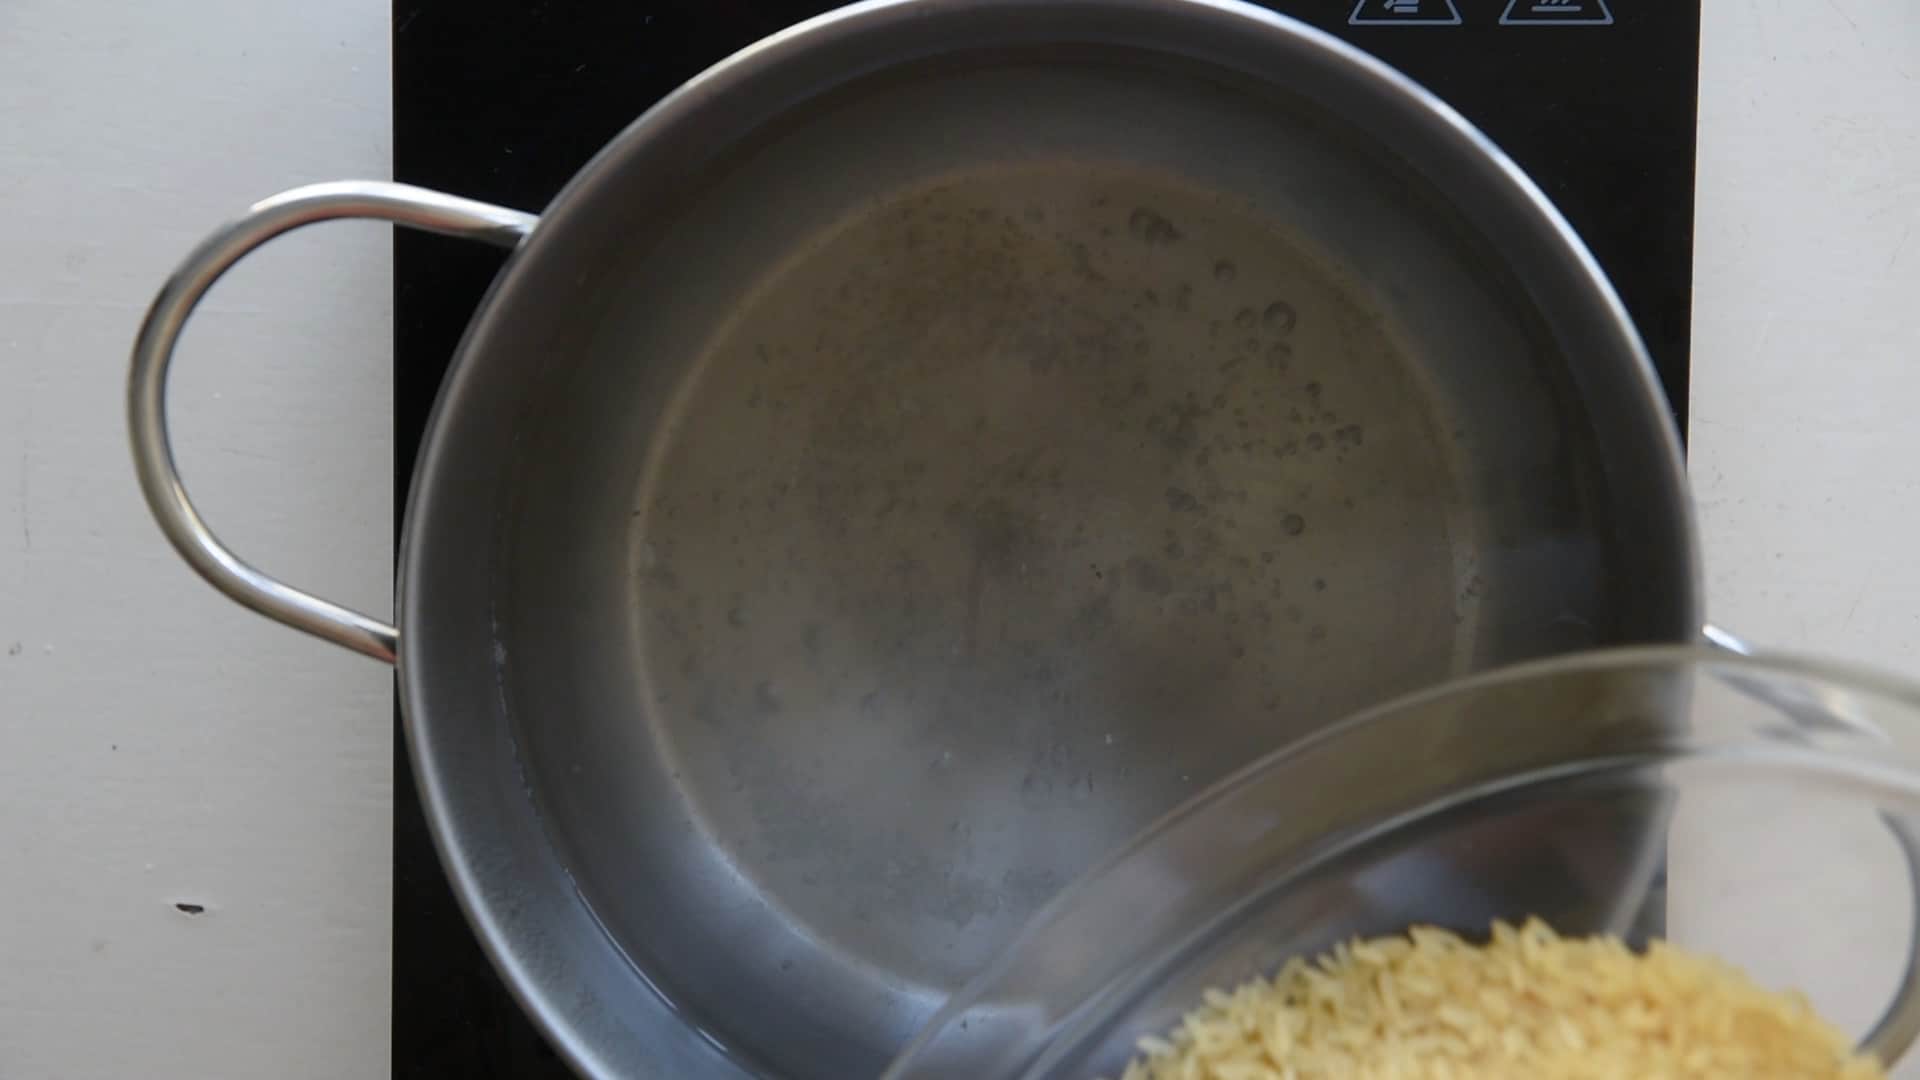 When boiling add the rice